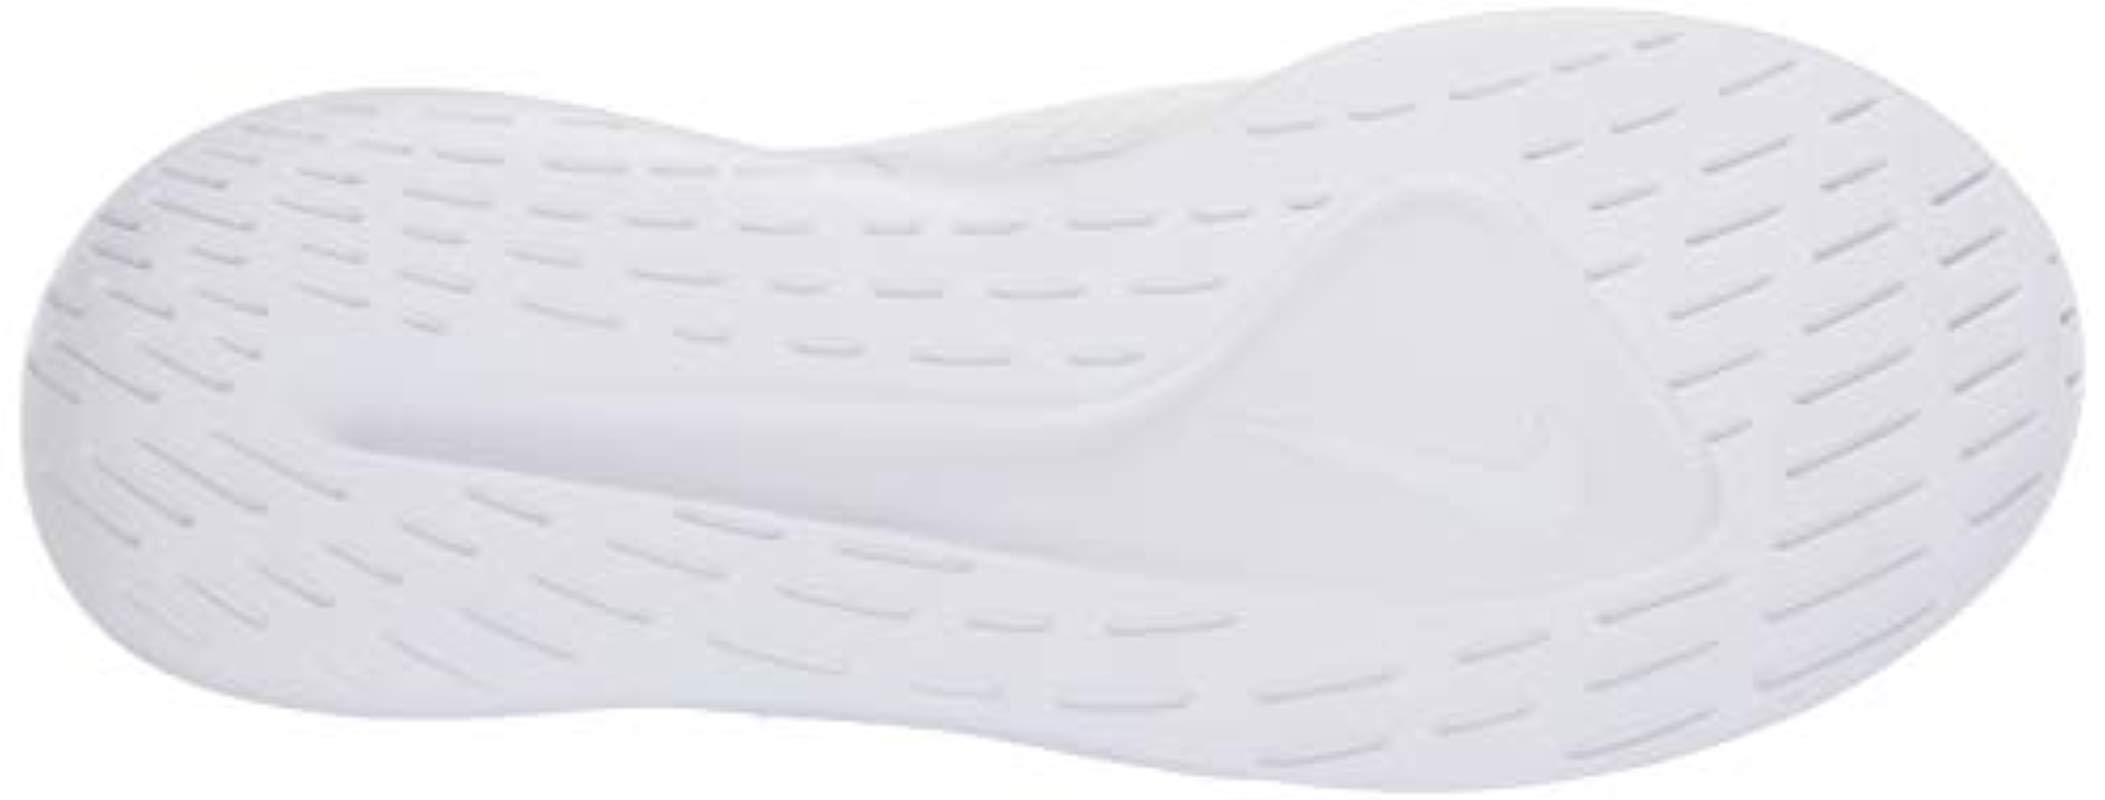 Nike Synthetic Wmns Viale Slp Track & Field Shoes in White/White (White) |  Lyst